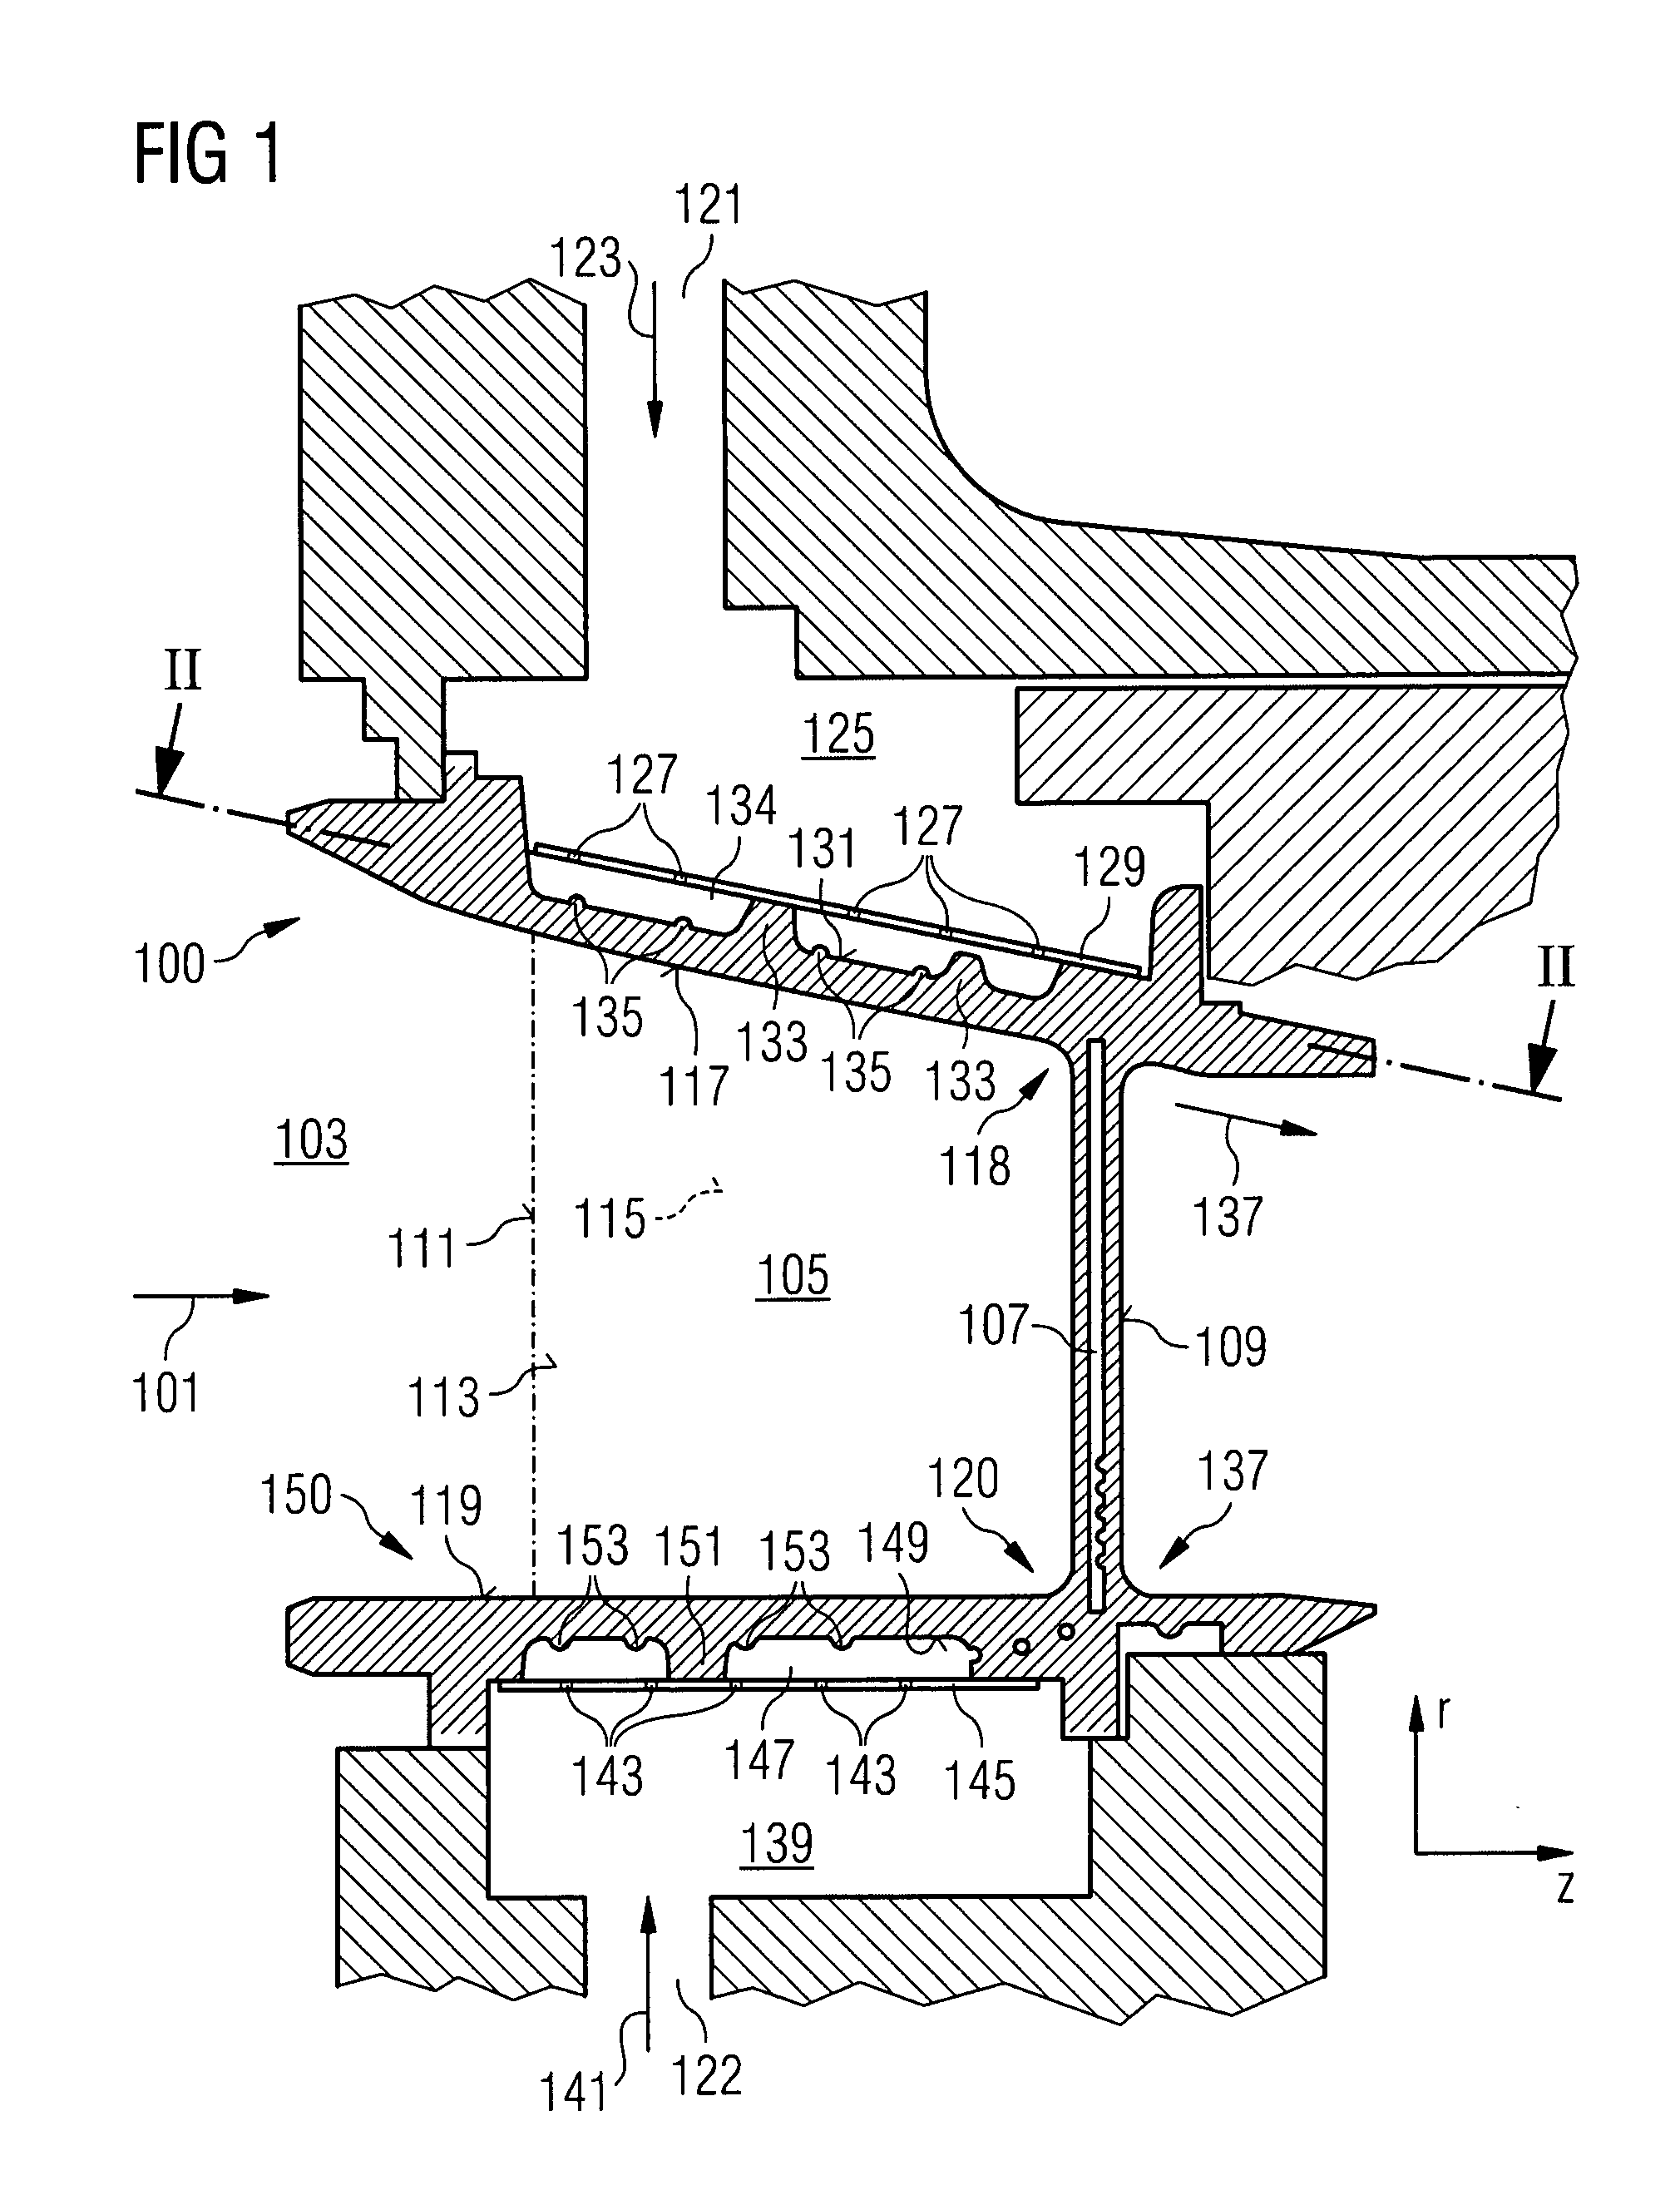 Platform segment for supporting a nozzle guide vane for a gas turbine and nozzle guide vane arrangement for a gas turbine